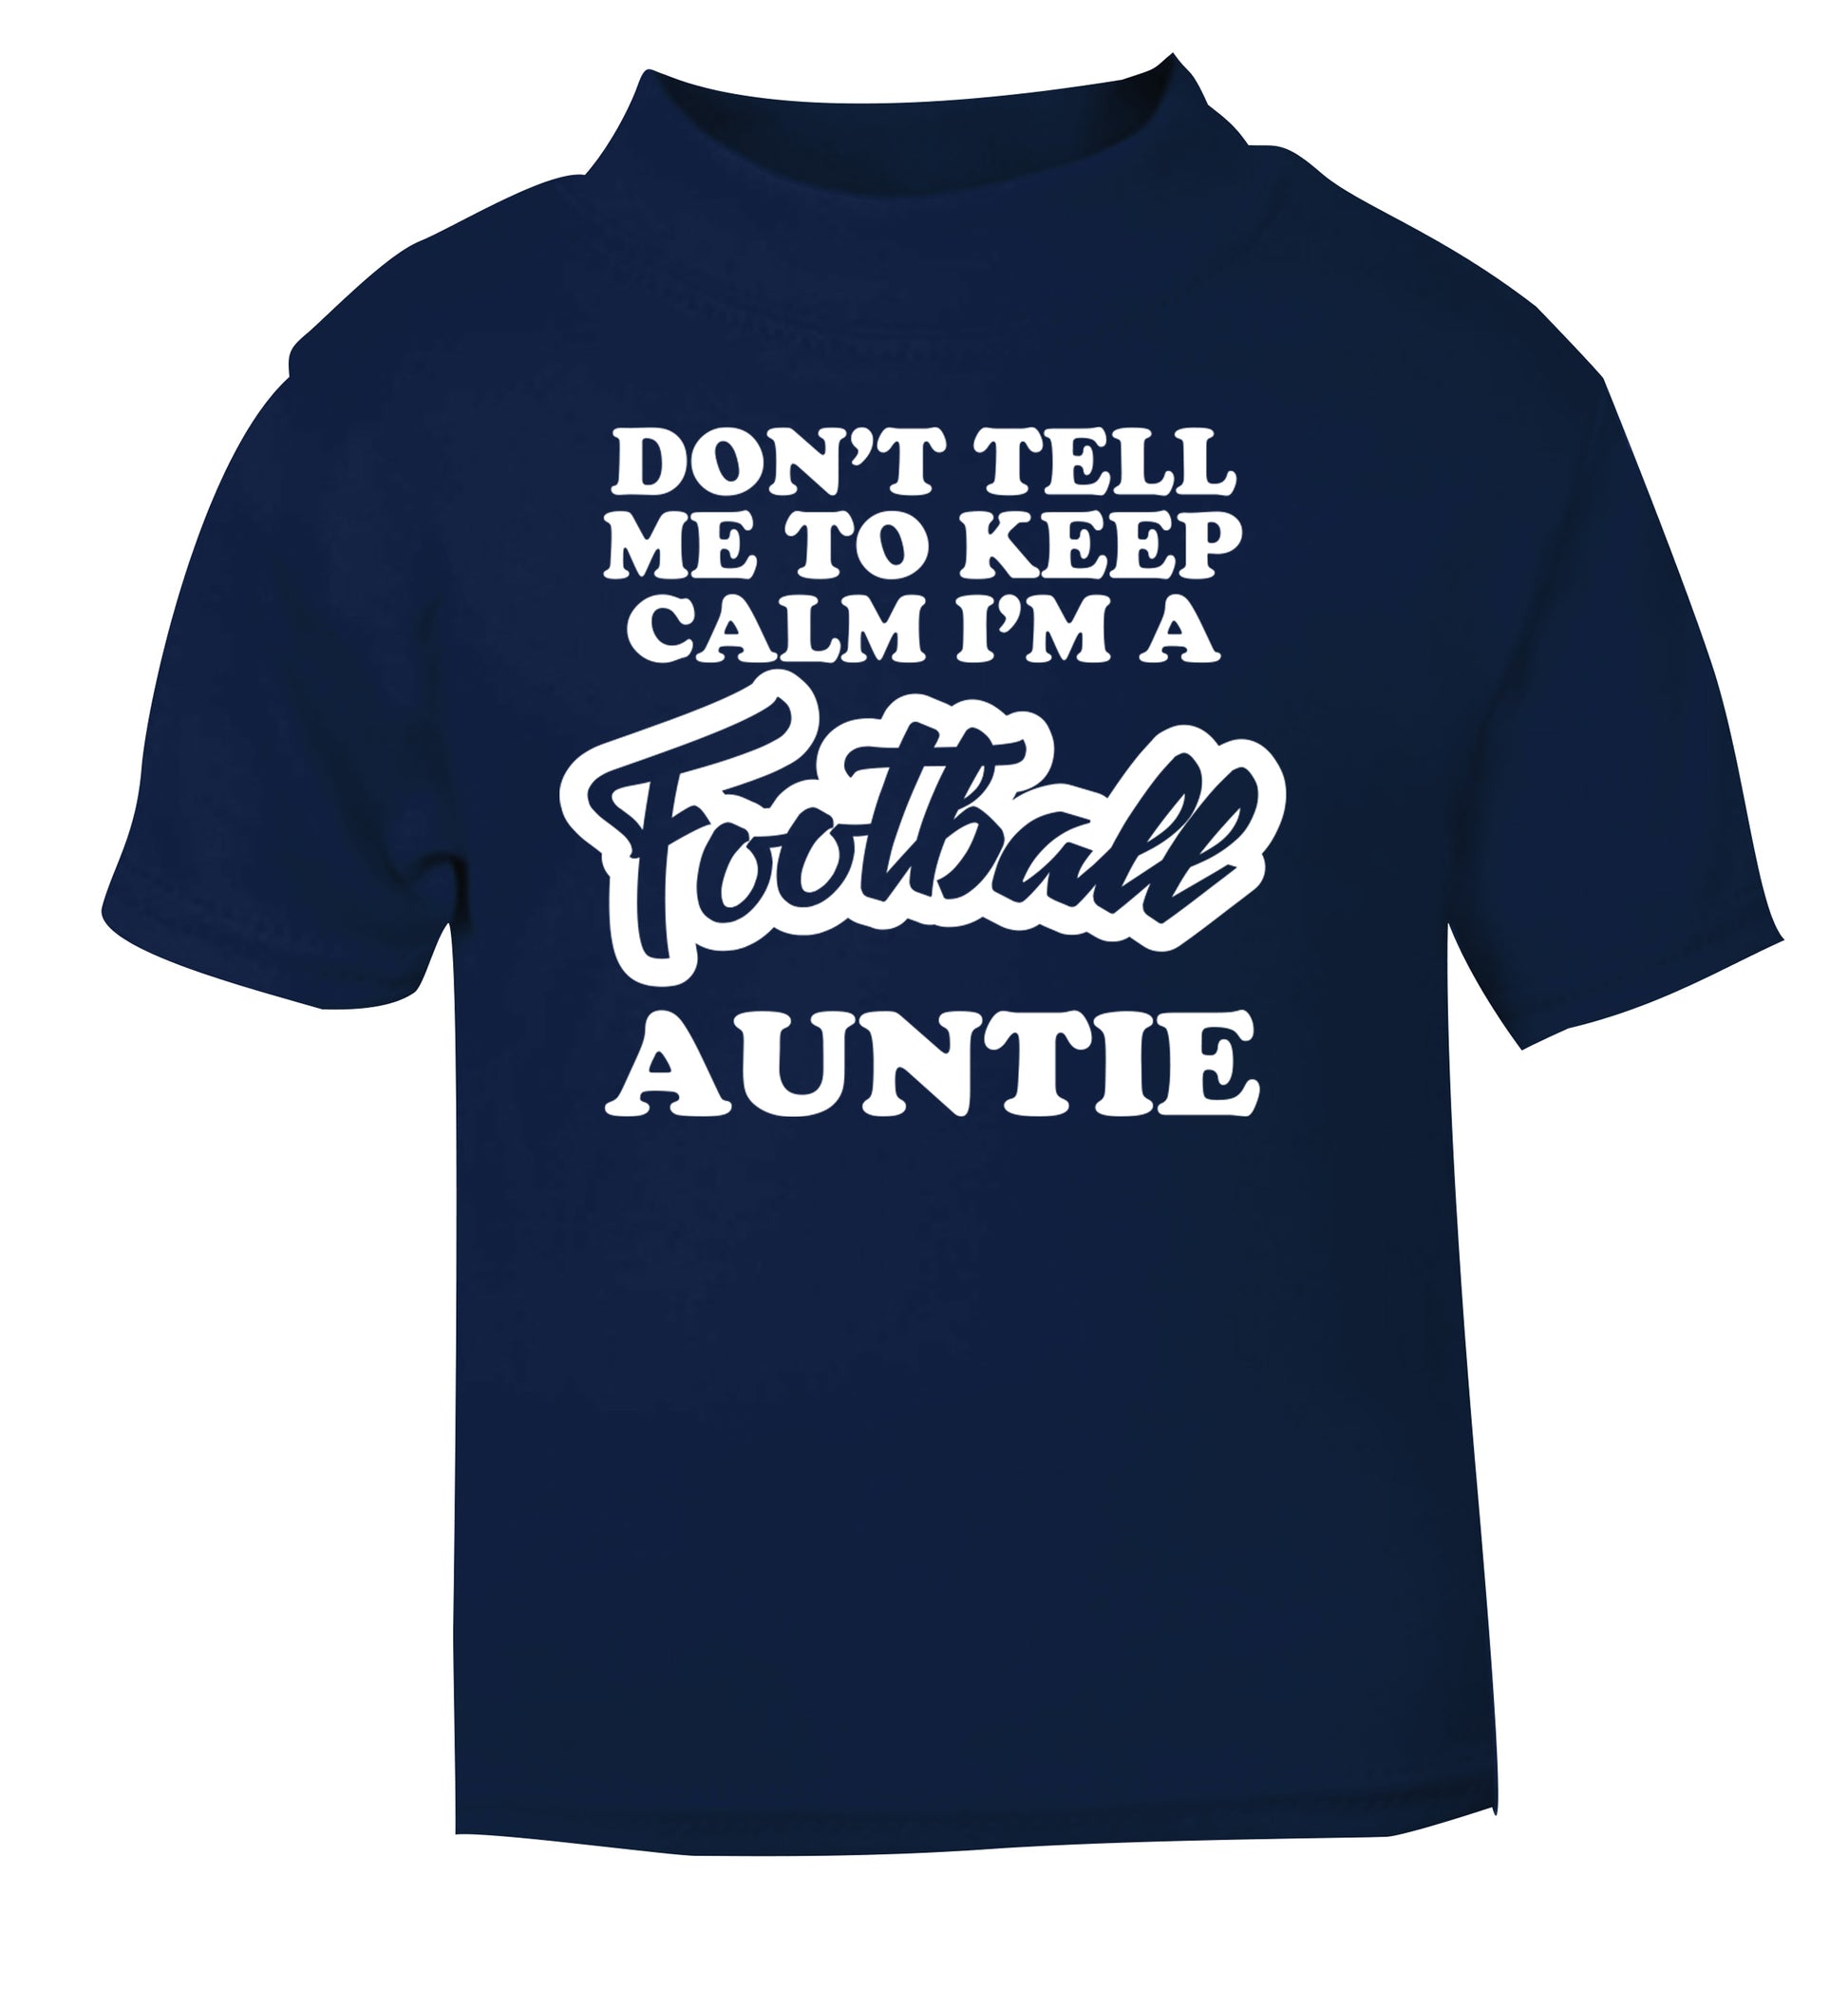 Don't tell me to keep calm I'm a football auntie navy Baby Toddler Tshirt 2 Years